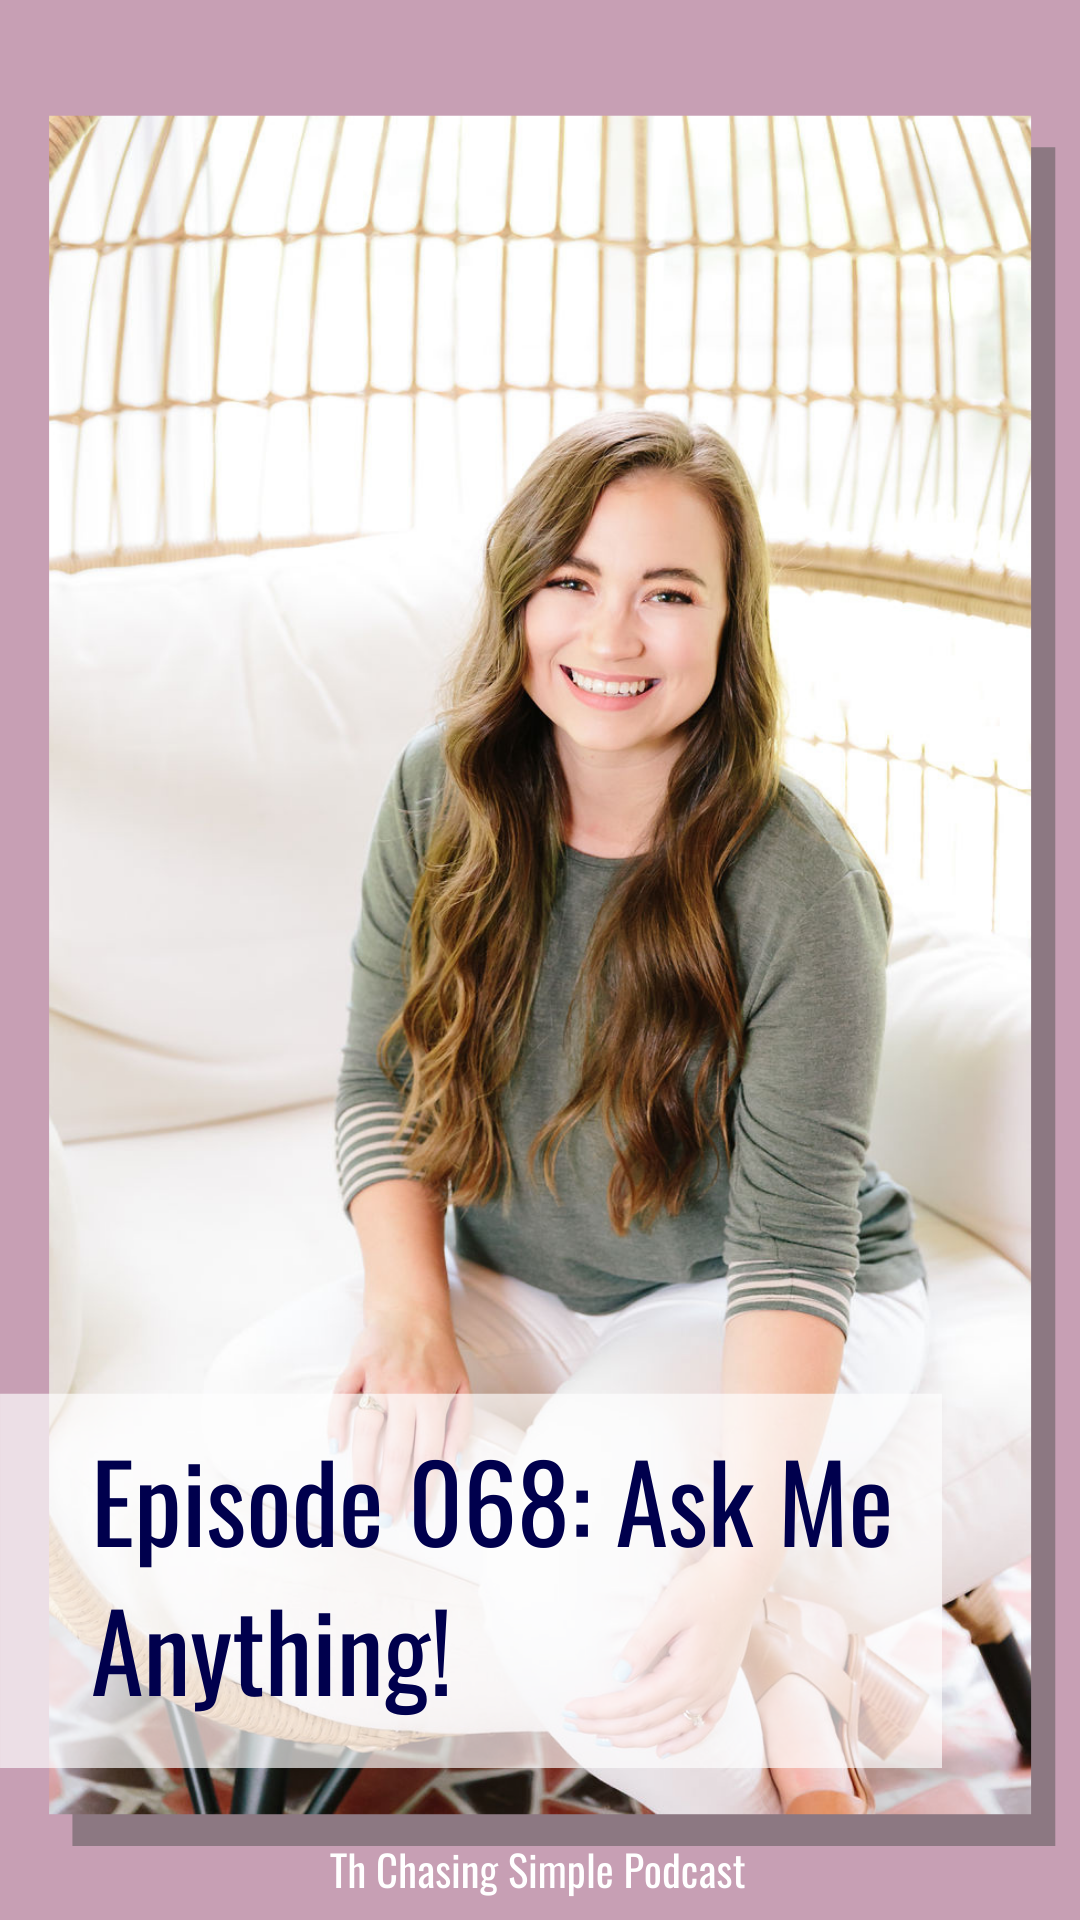 This week I'm celebrating my 28th birthday with a fun "Ask Me Anything!" episode with questions submitted by my students!